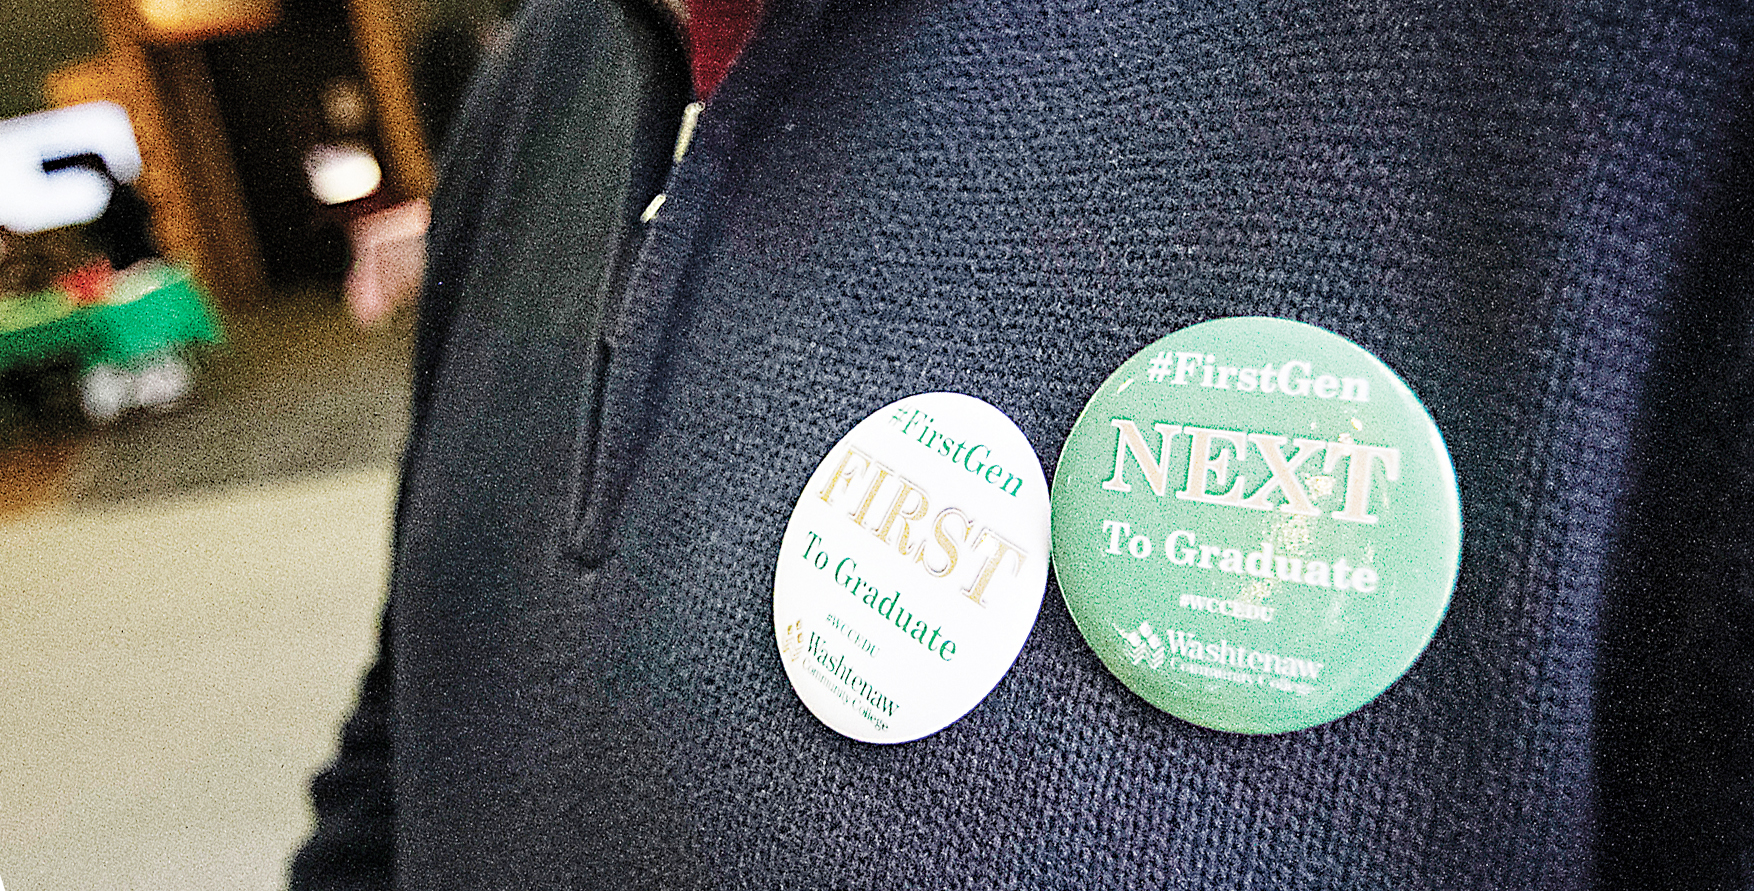 These buttons, distributed around campus at various events, identify current first-generation college students and those WCC faculty and staff who were first-generation college students themselves at one time. (Photo by Kelly Gampel)